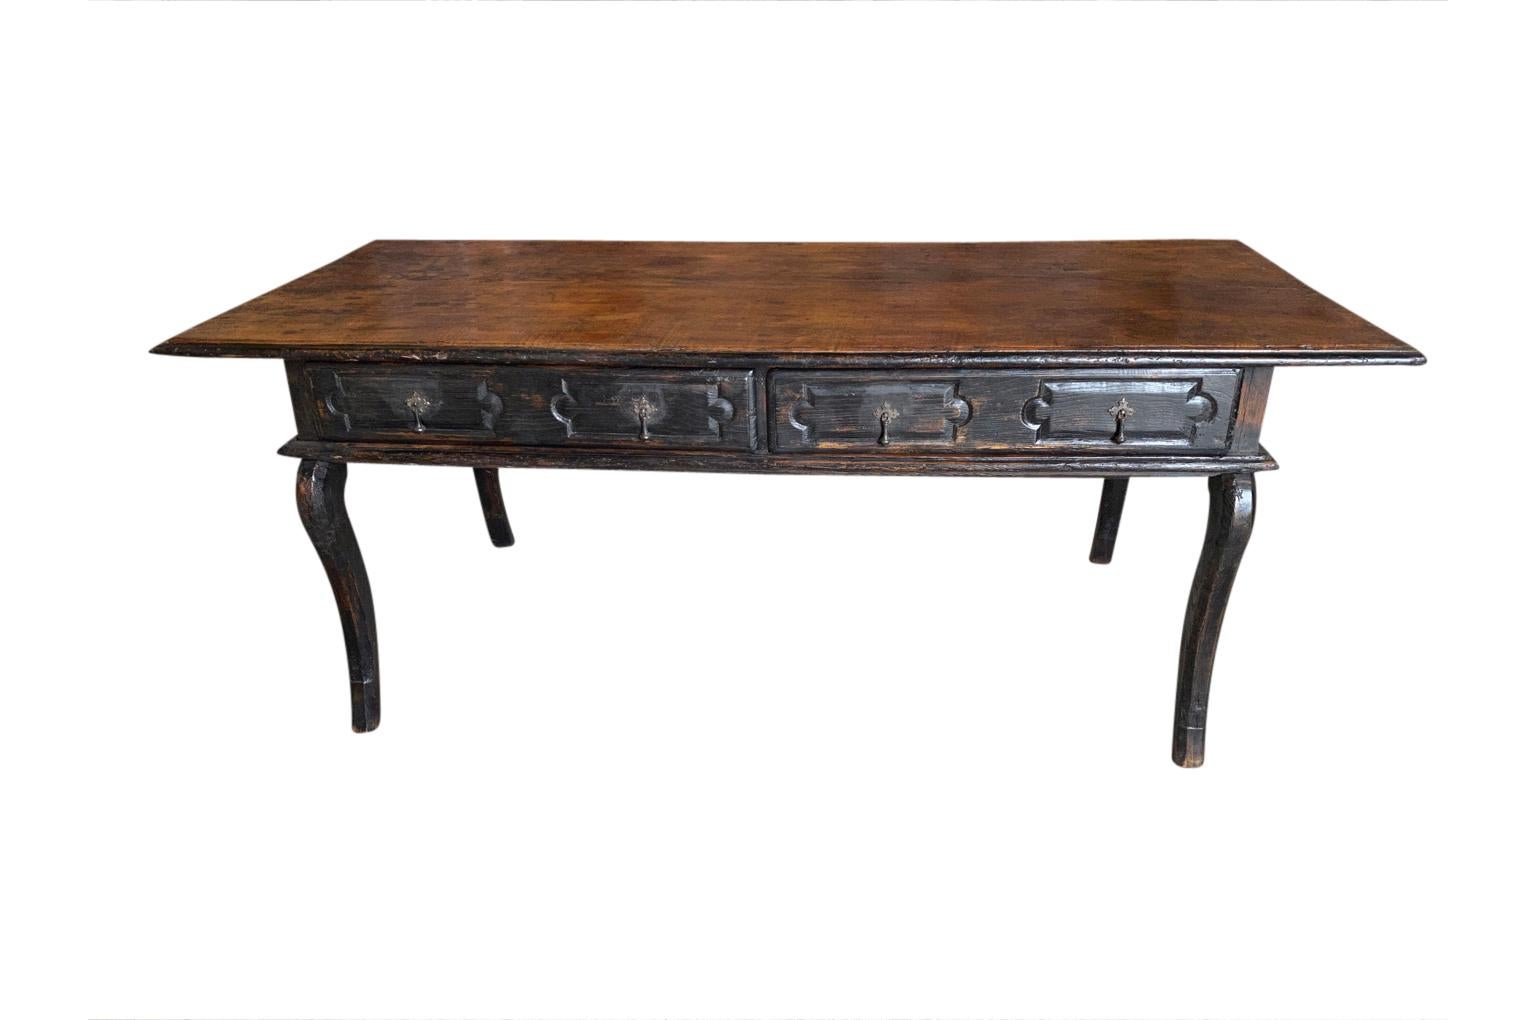 A very handsome 18th century writing table - desk from Tuscany. Beautifully constructed from painted chestnut with the top in a solid board of exposed chestnut, 2 drawers, molded panels all around resting on cabriole legs. Super patina.